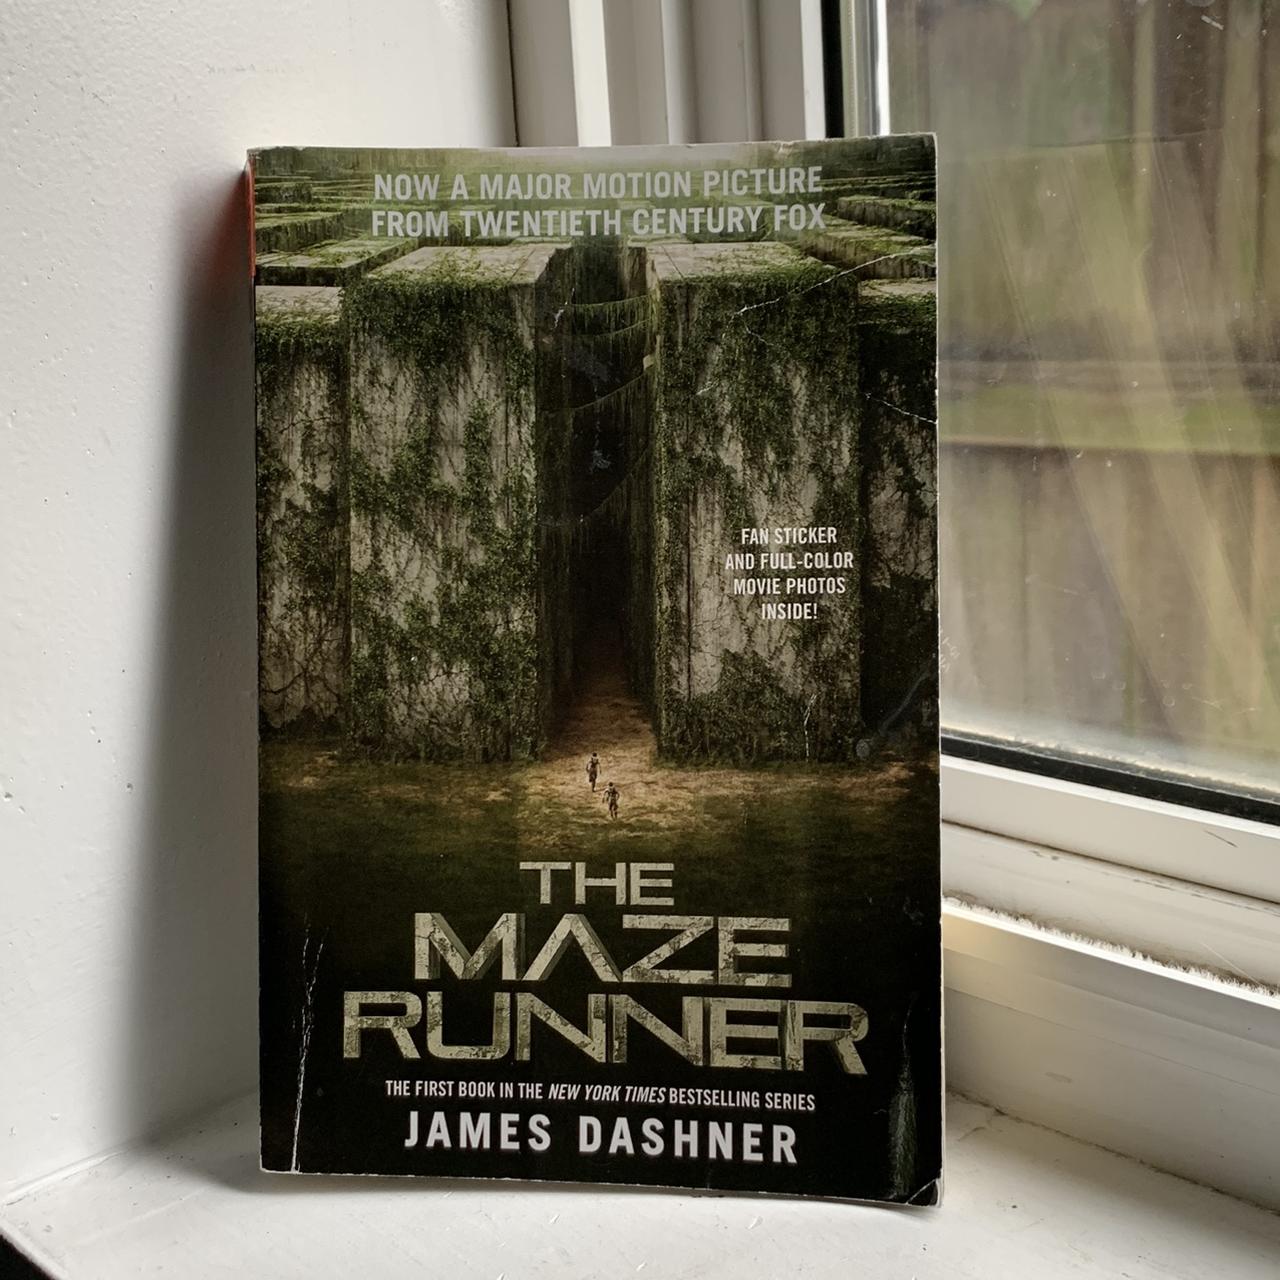 The maze runner (fictional product)